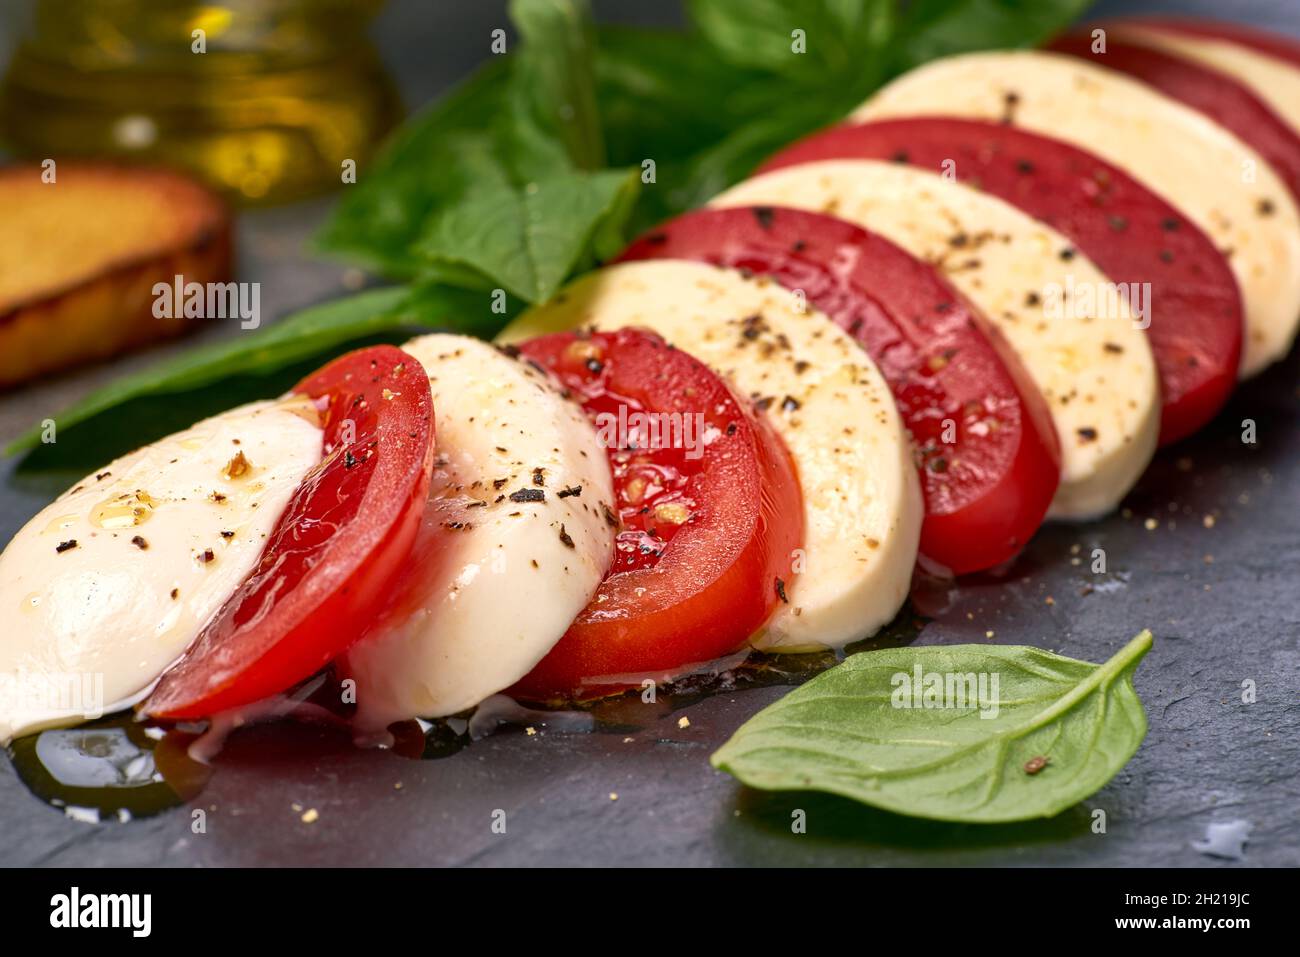 Mozzarella and tomato slices on black slate with basil and spices Stock Photo